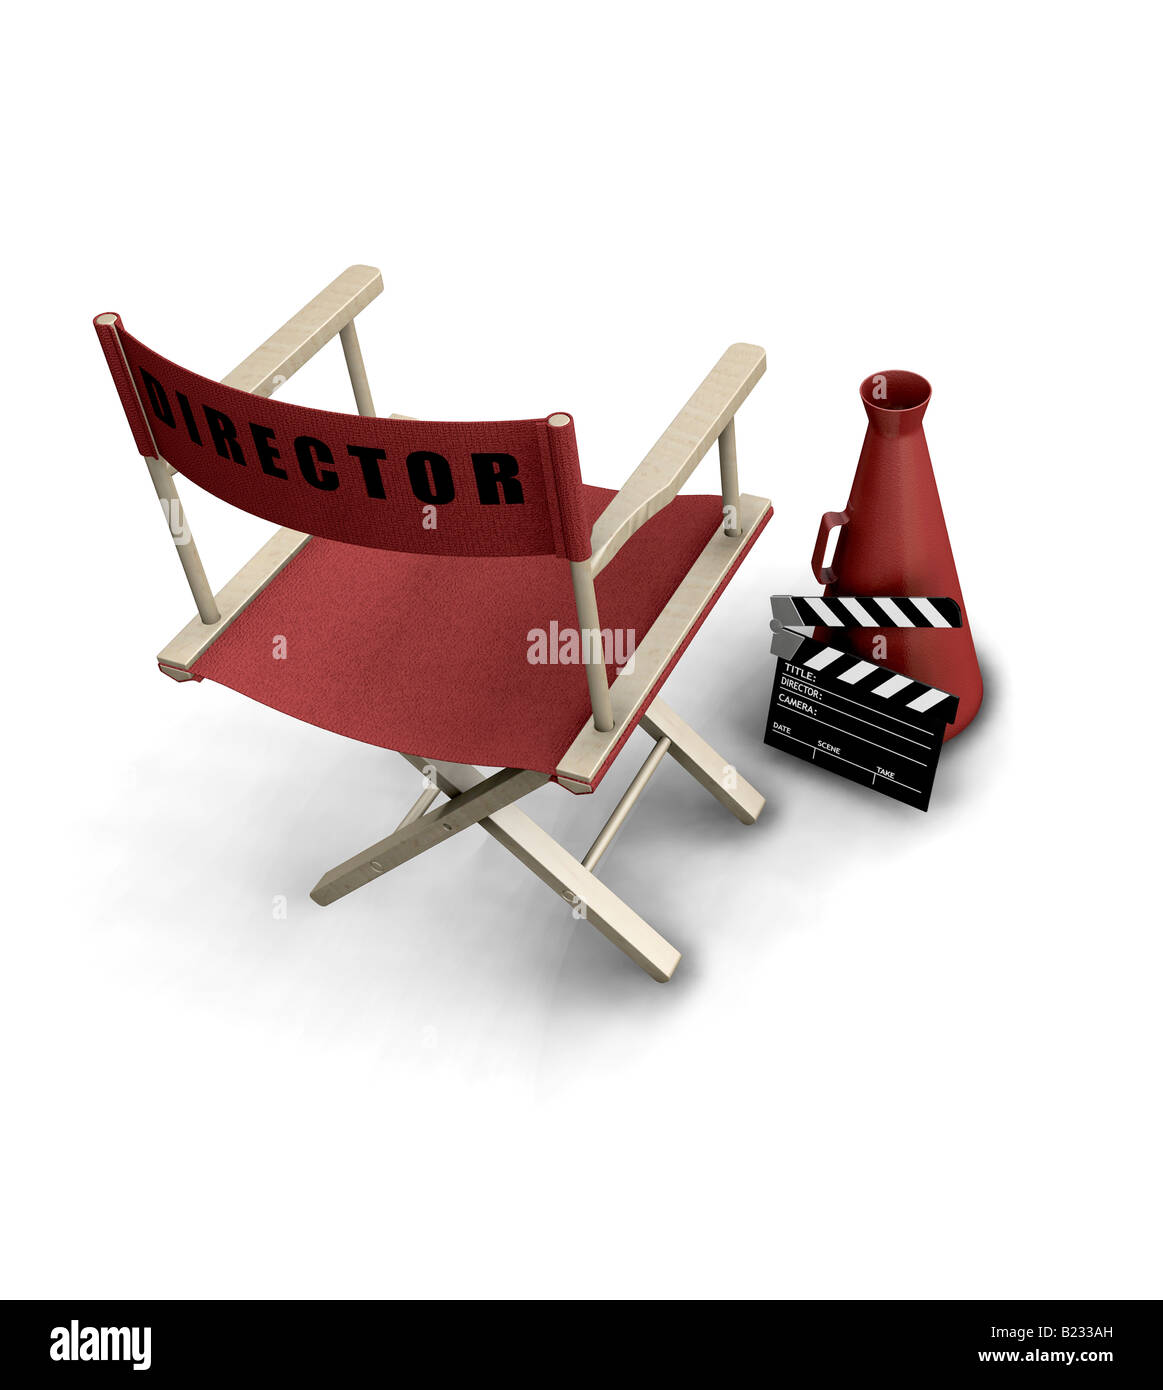 3D render of a directors chair Stock Photo